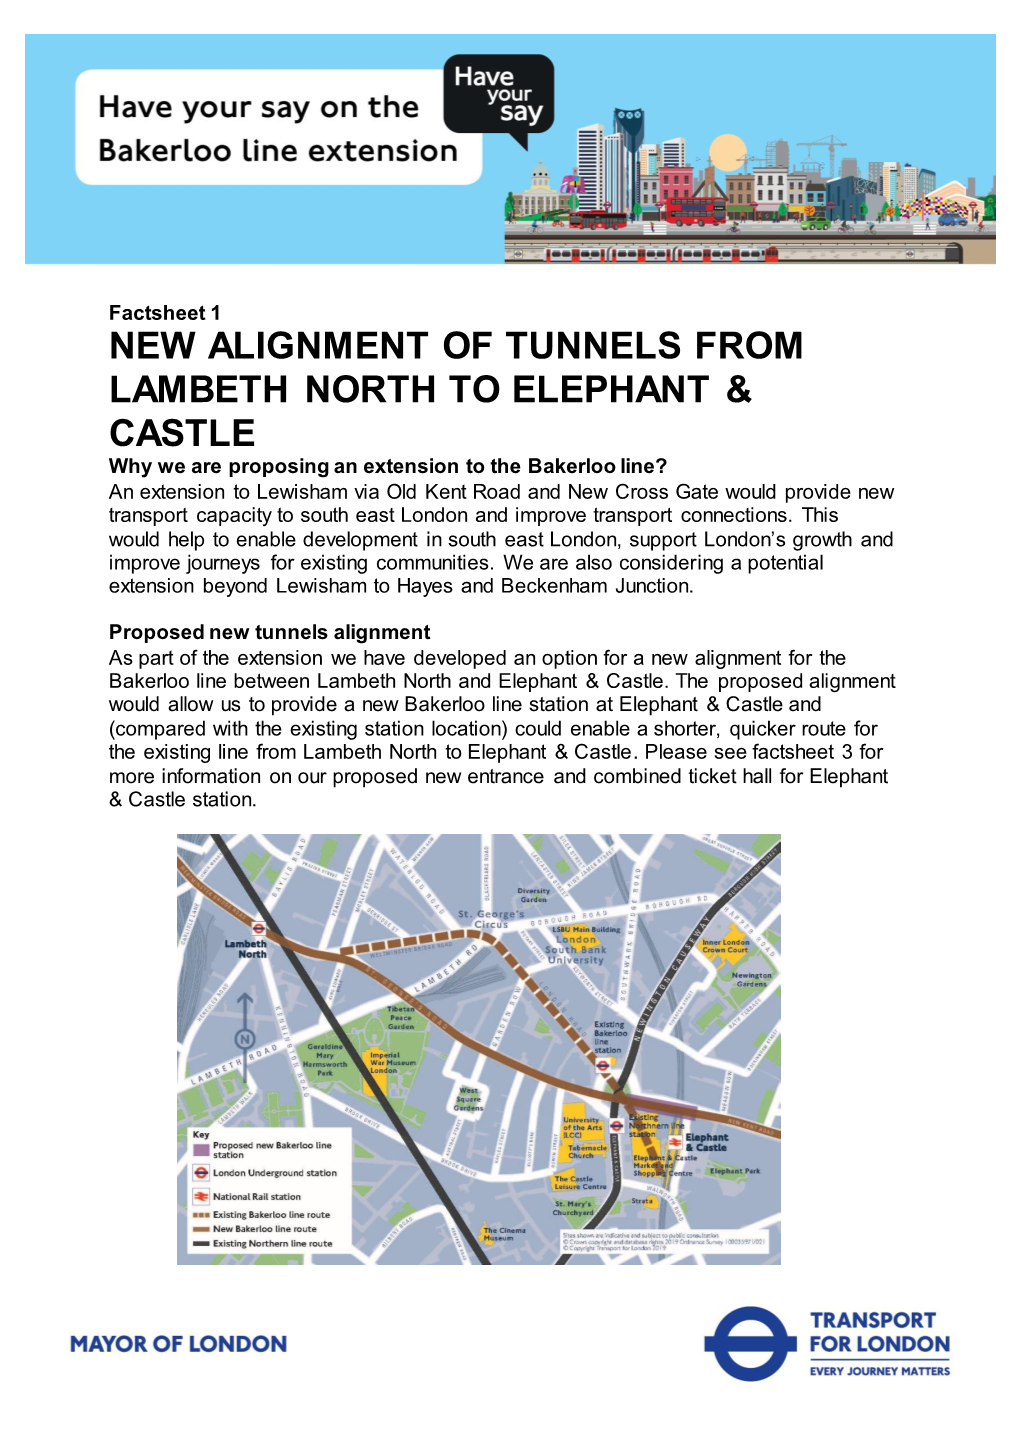 New Alignment of Tunnels from Lambeth North to Elephant & Castle